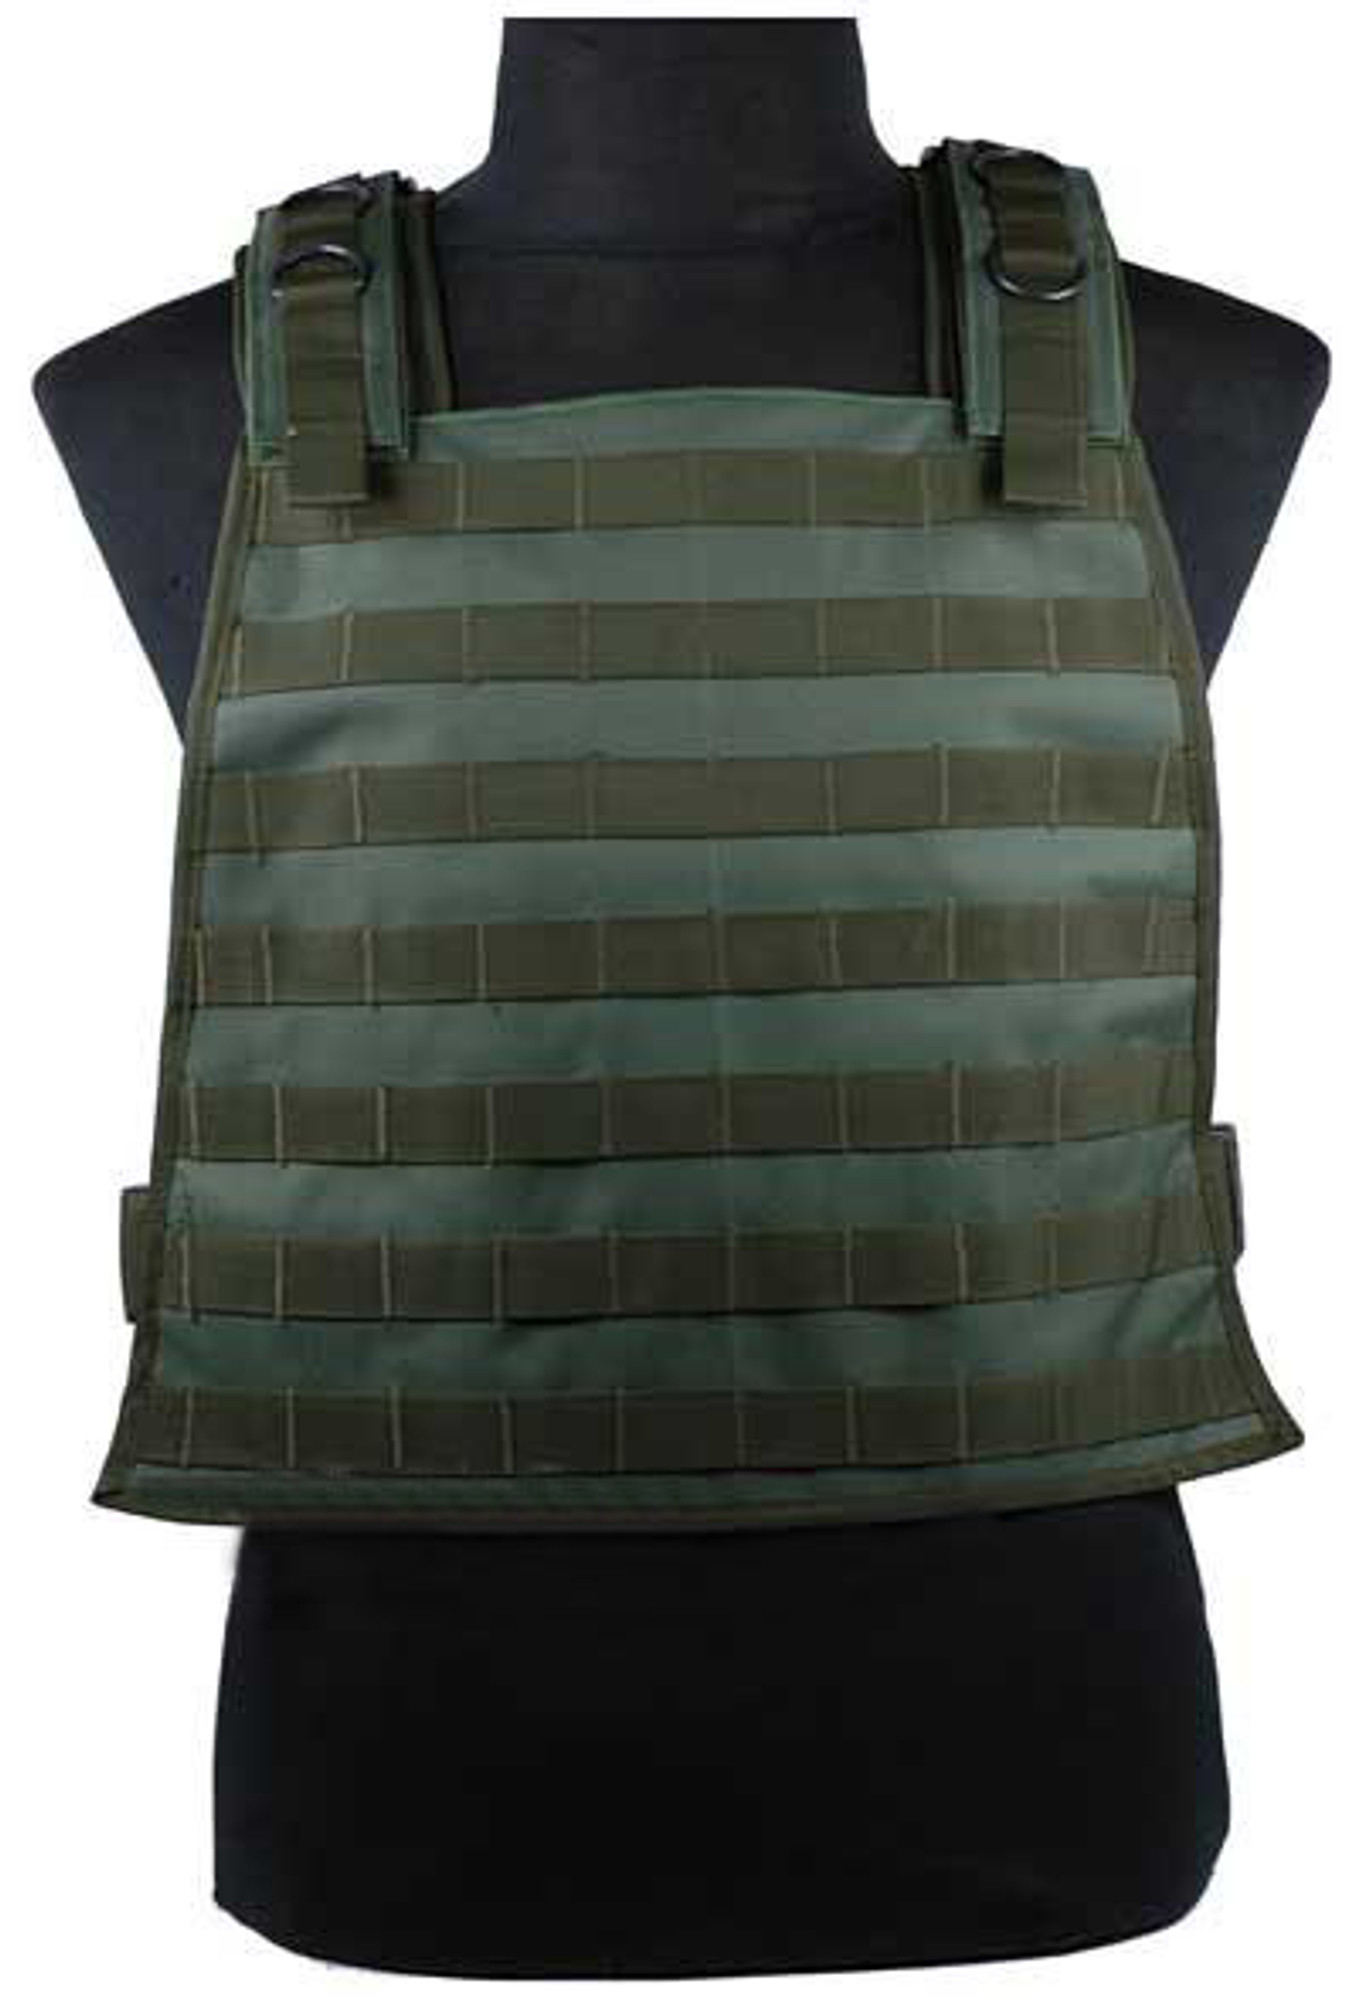 Matrix Tactical Systems MOLLE Ready LBV  (Load Bearing Vest) w/ Hydration Carrier (Black)